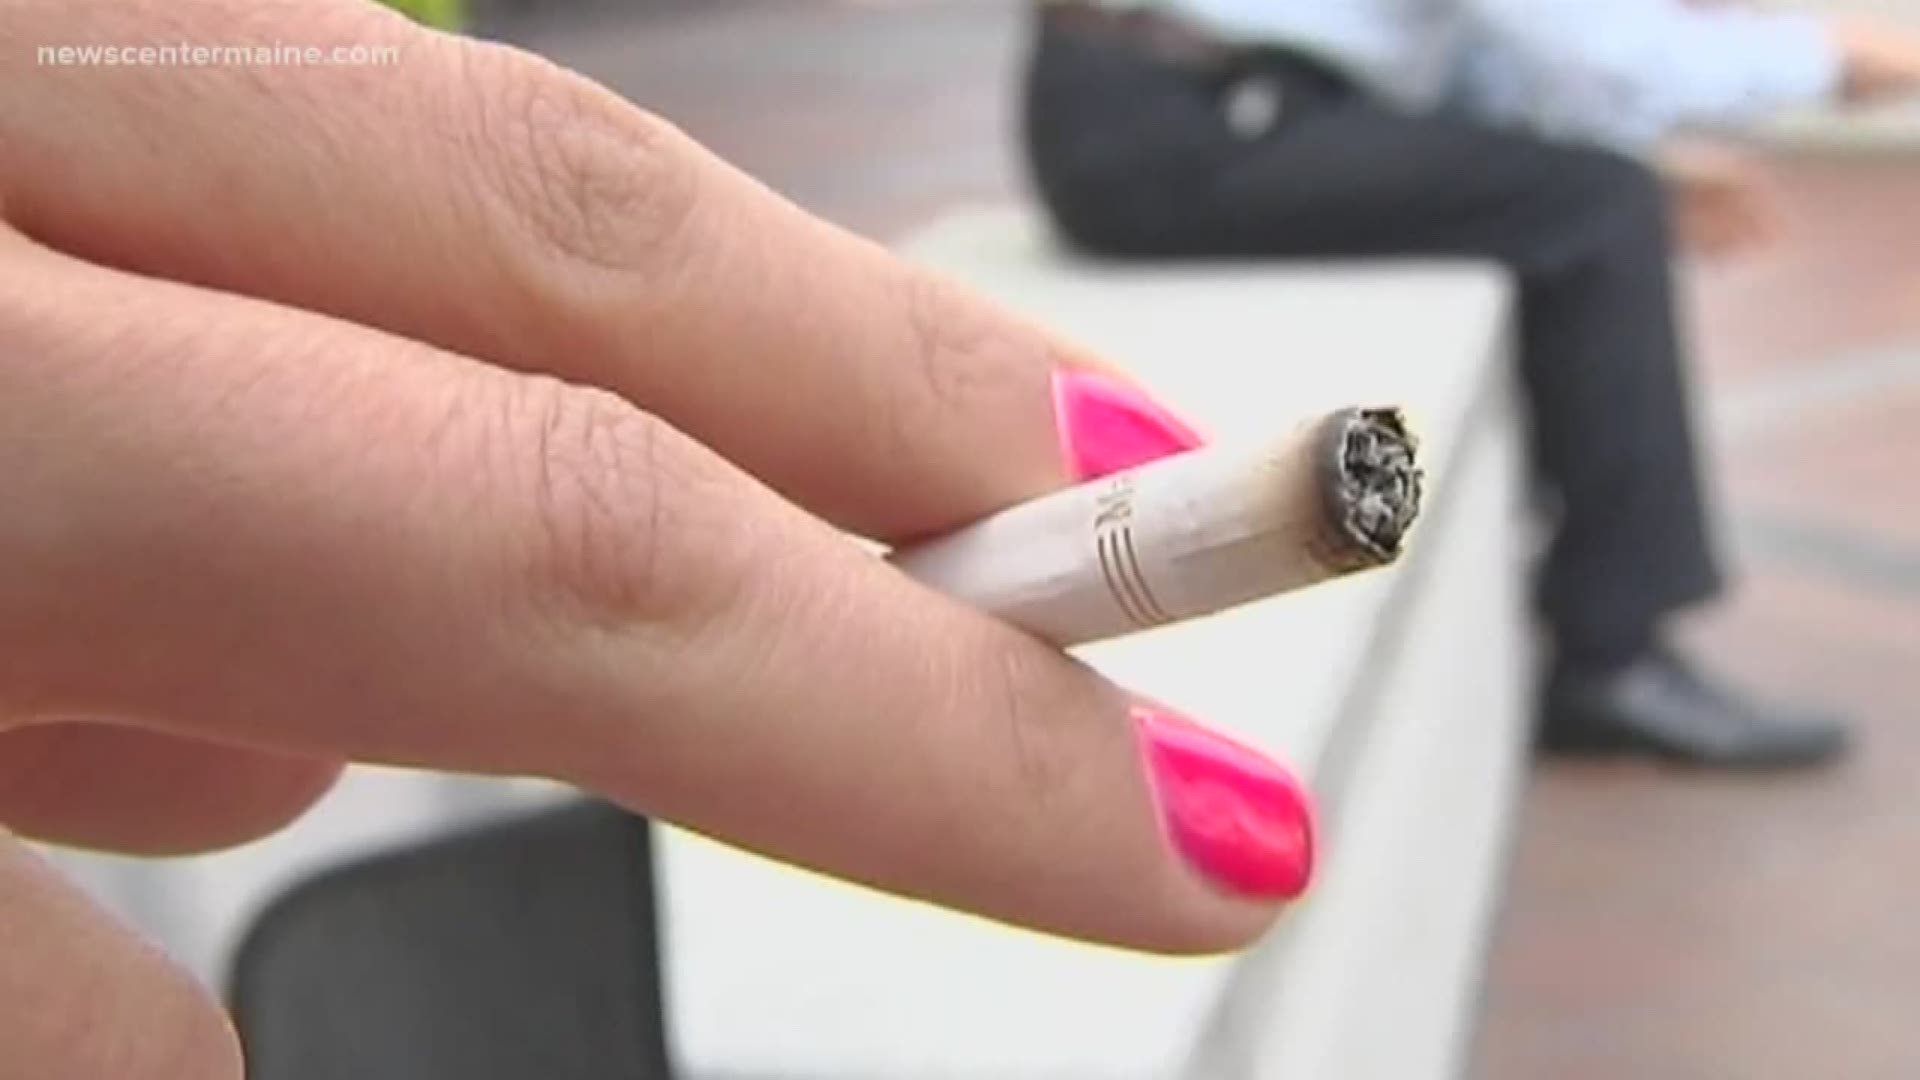 South Portland City Council voted to revise part of a state tobacco law. The city's new ordinance prohibits the possession of tobacco by anyone under the age of 21. Violators could be fined between $500 and $2,500 for each offense.